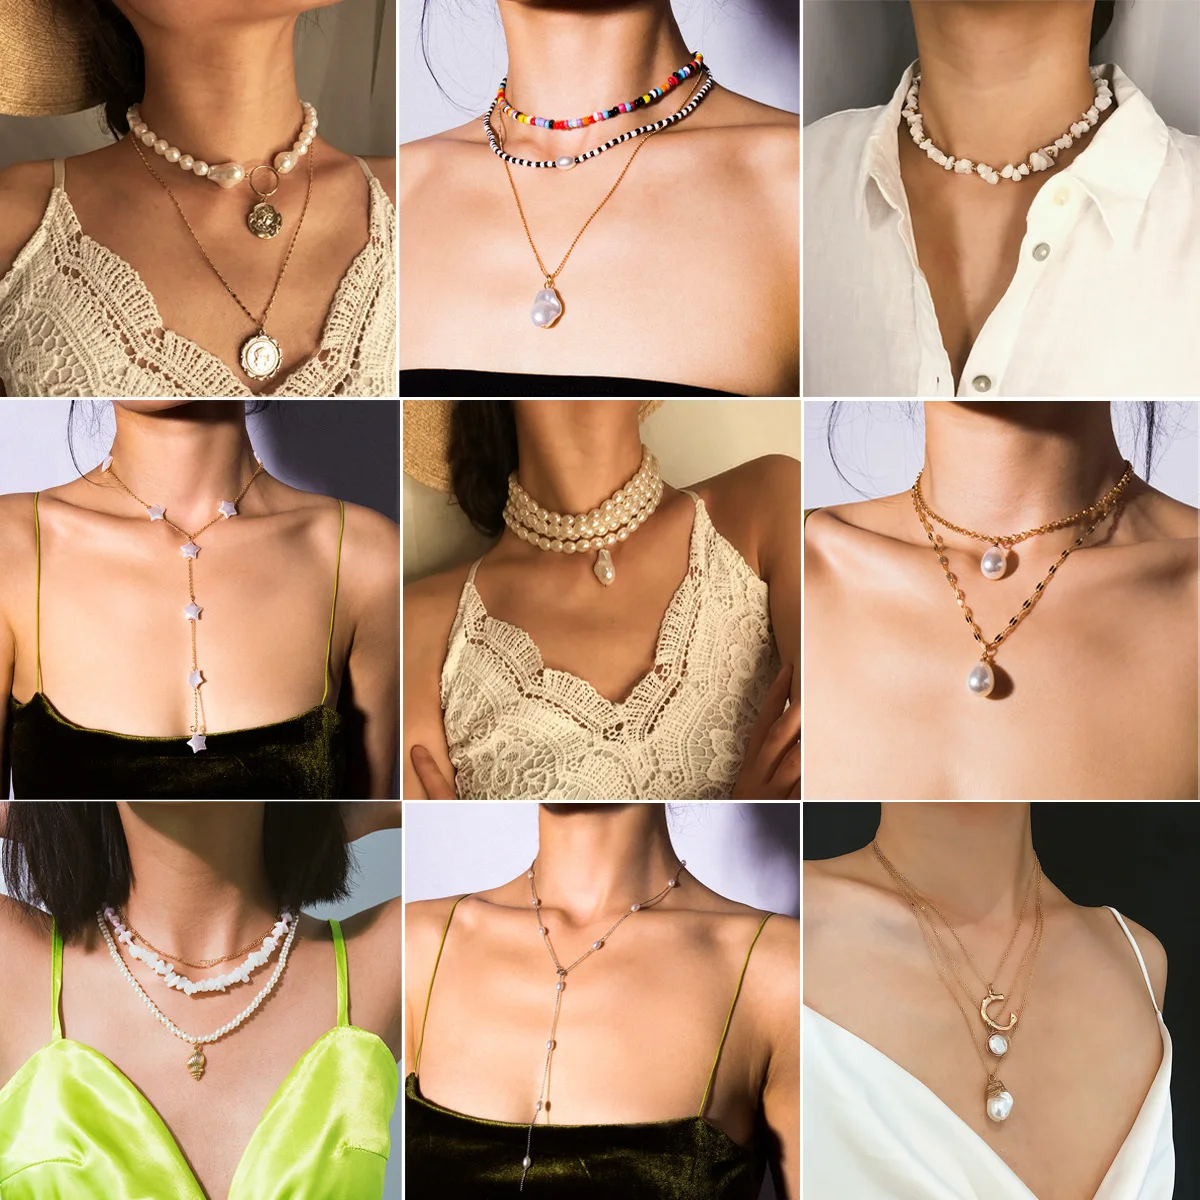 

Y2y Multi-layer Pearl Choker Necklace Women Jewelry on The Neck Chain Long Beads Pendants Necklace Chocker Collar for Women